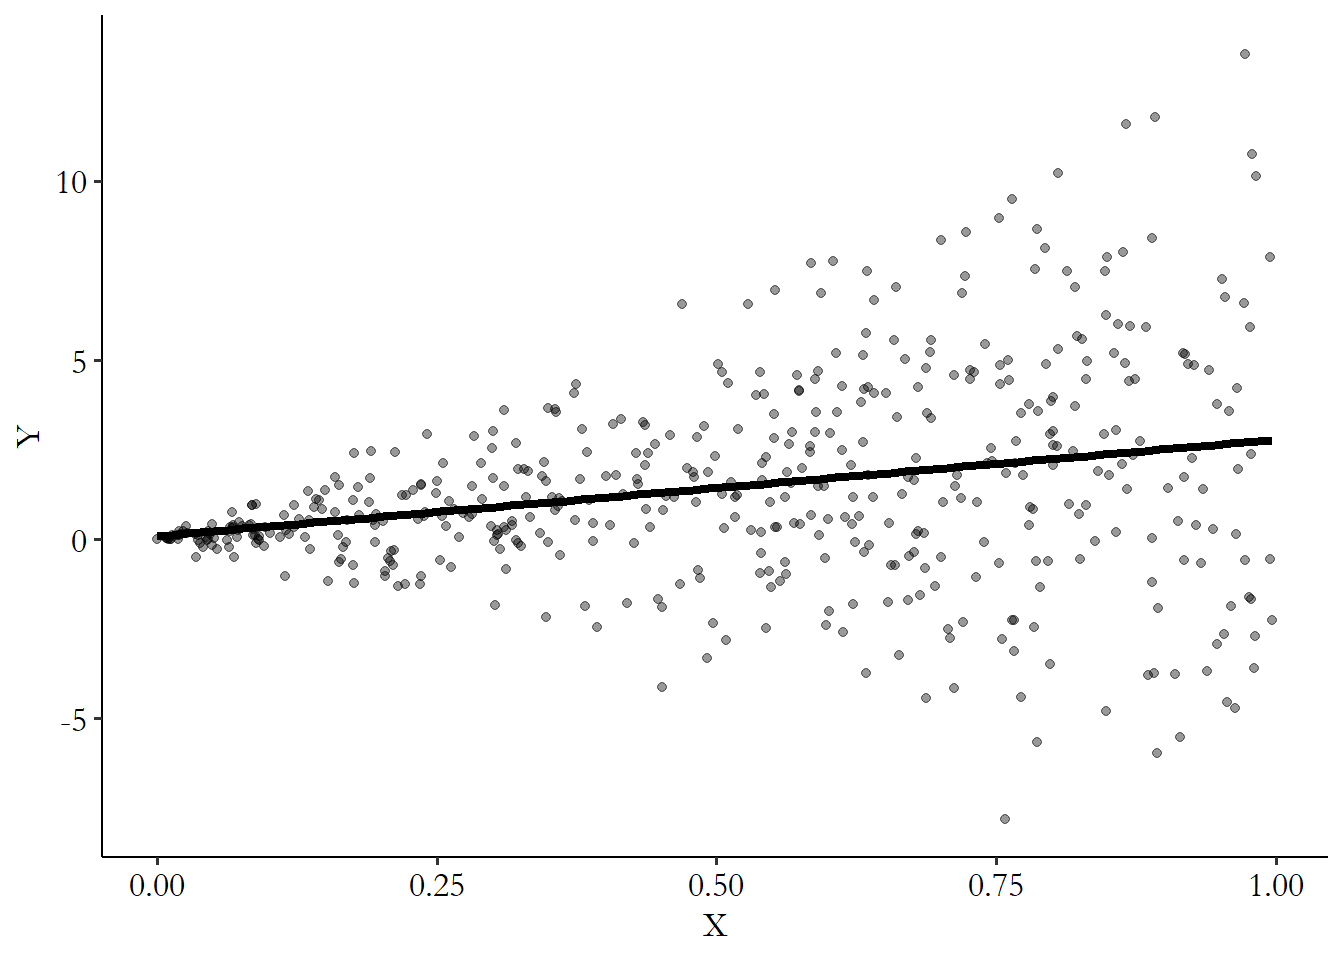 Scatterplot showing data in which, on the left side of the graph, errors have low variance, but on the right side they have high variance.